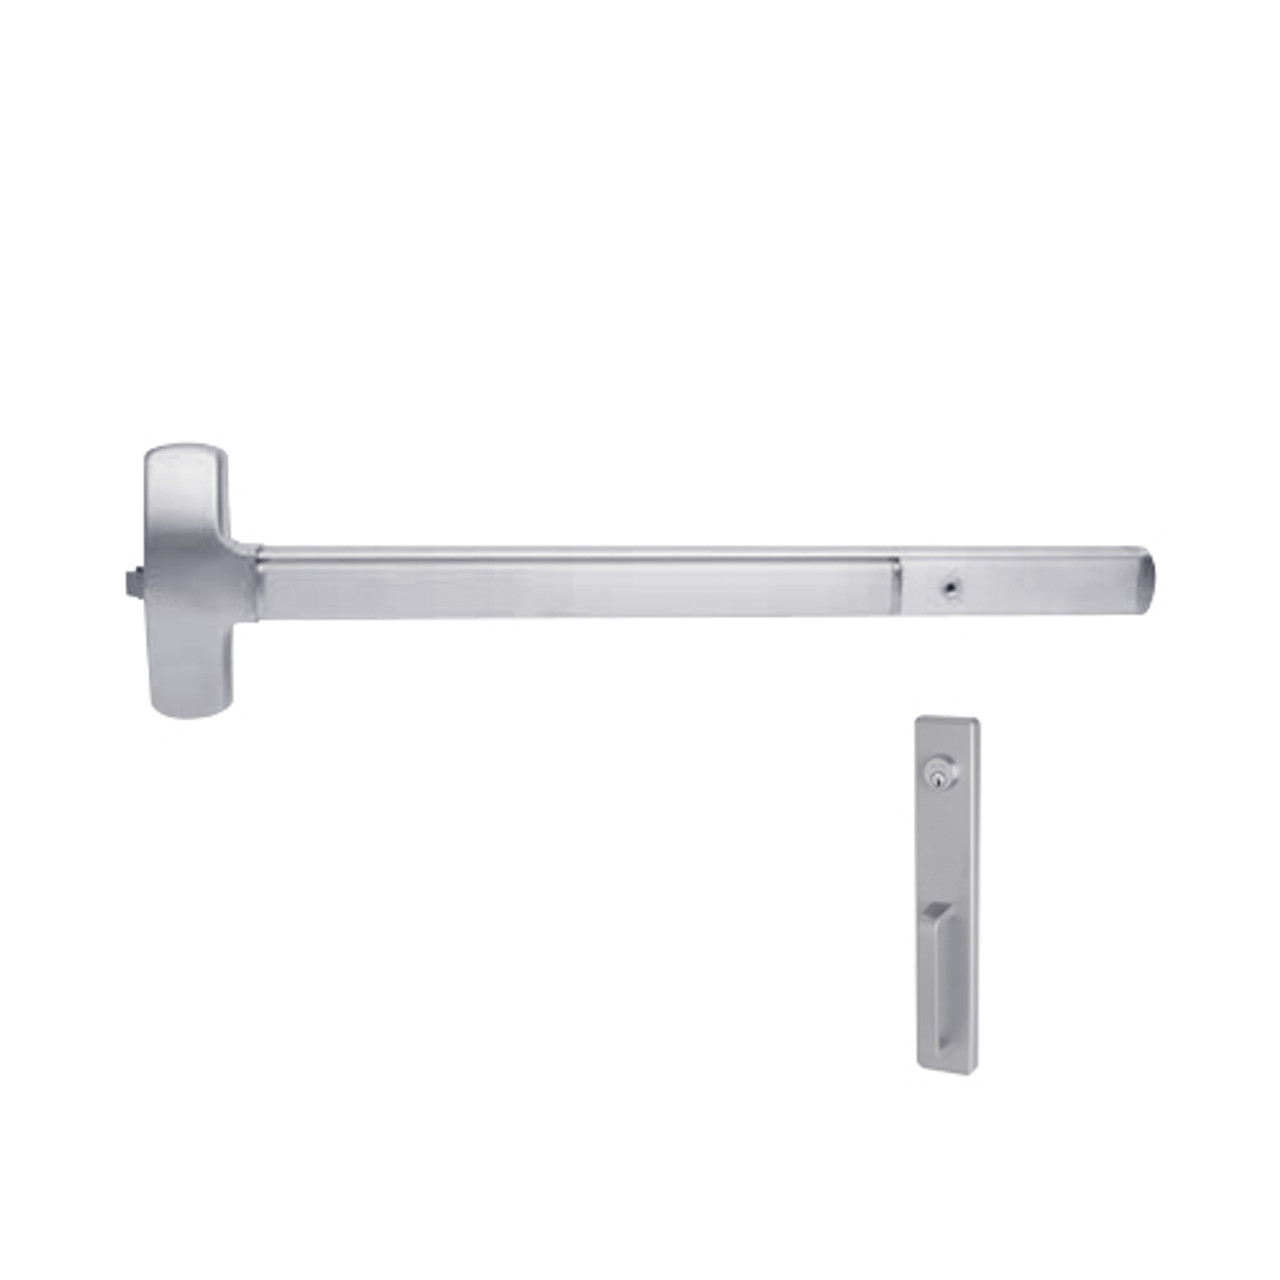 25-R-NL-US32-4 Falcon Exit Device in Polished Stainless Steel